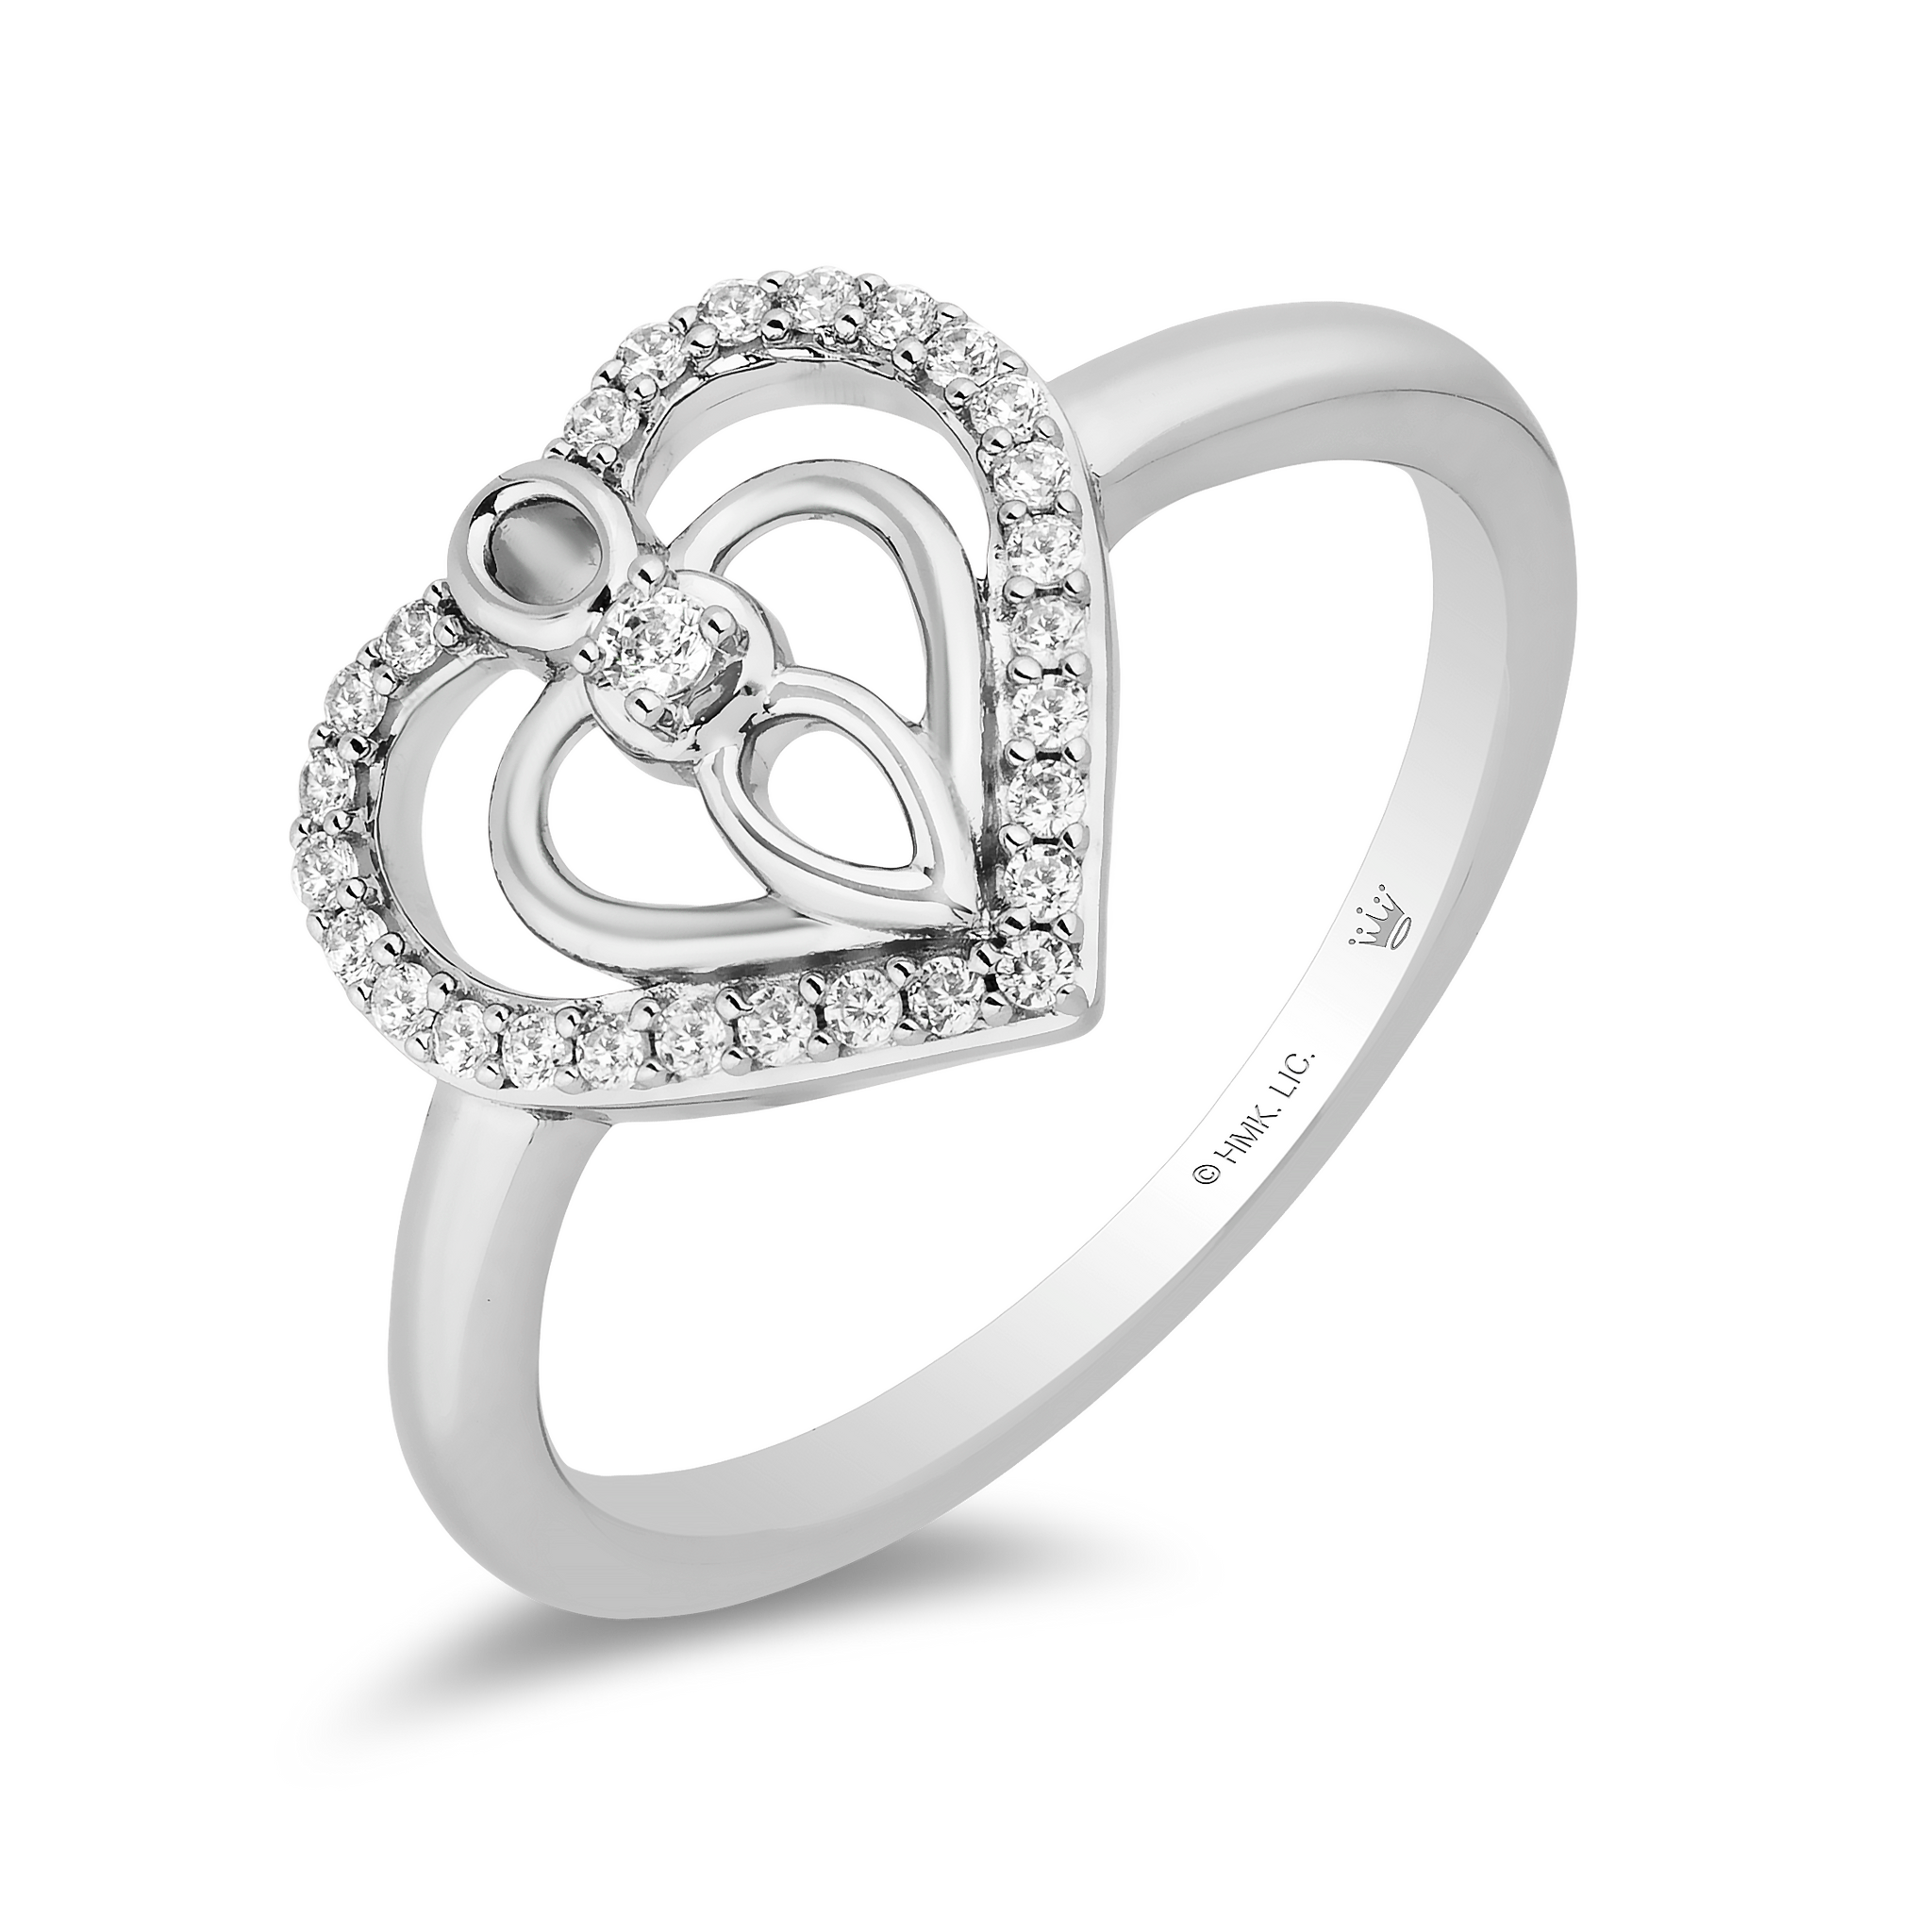 Hallmark Fine Jewelry String of Hearts Ring in Sterling Silver with 1/10 Cttw of Diamonds 7 by Hallmark Diamonds I Fine Jewelry